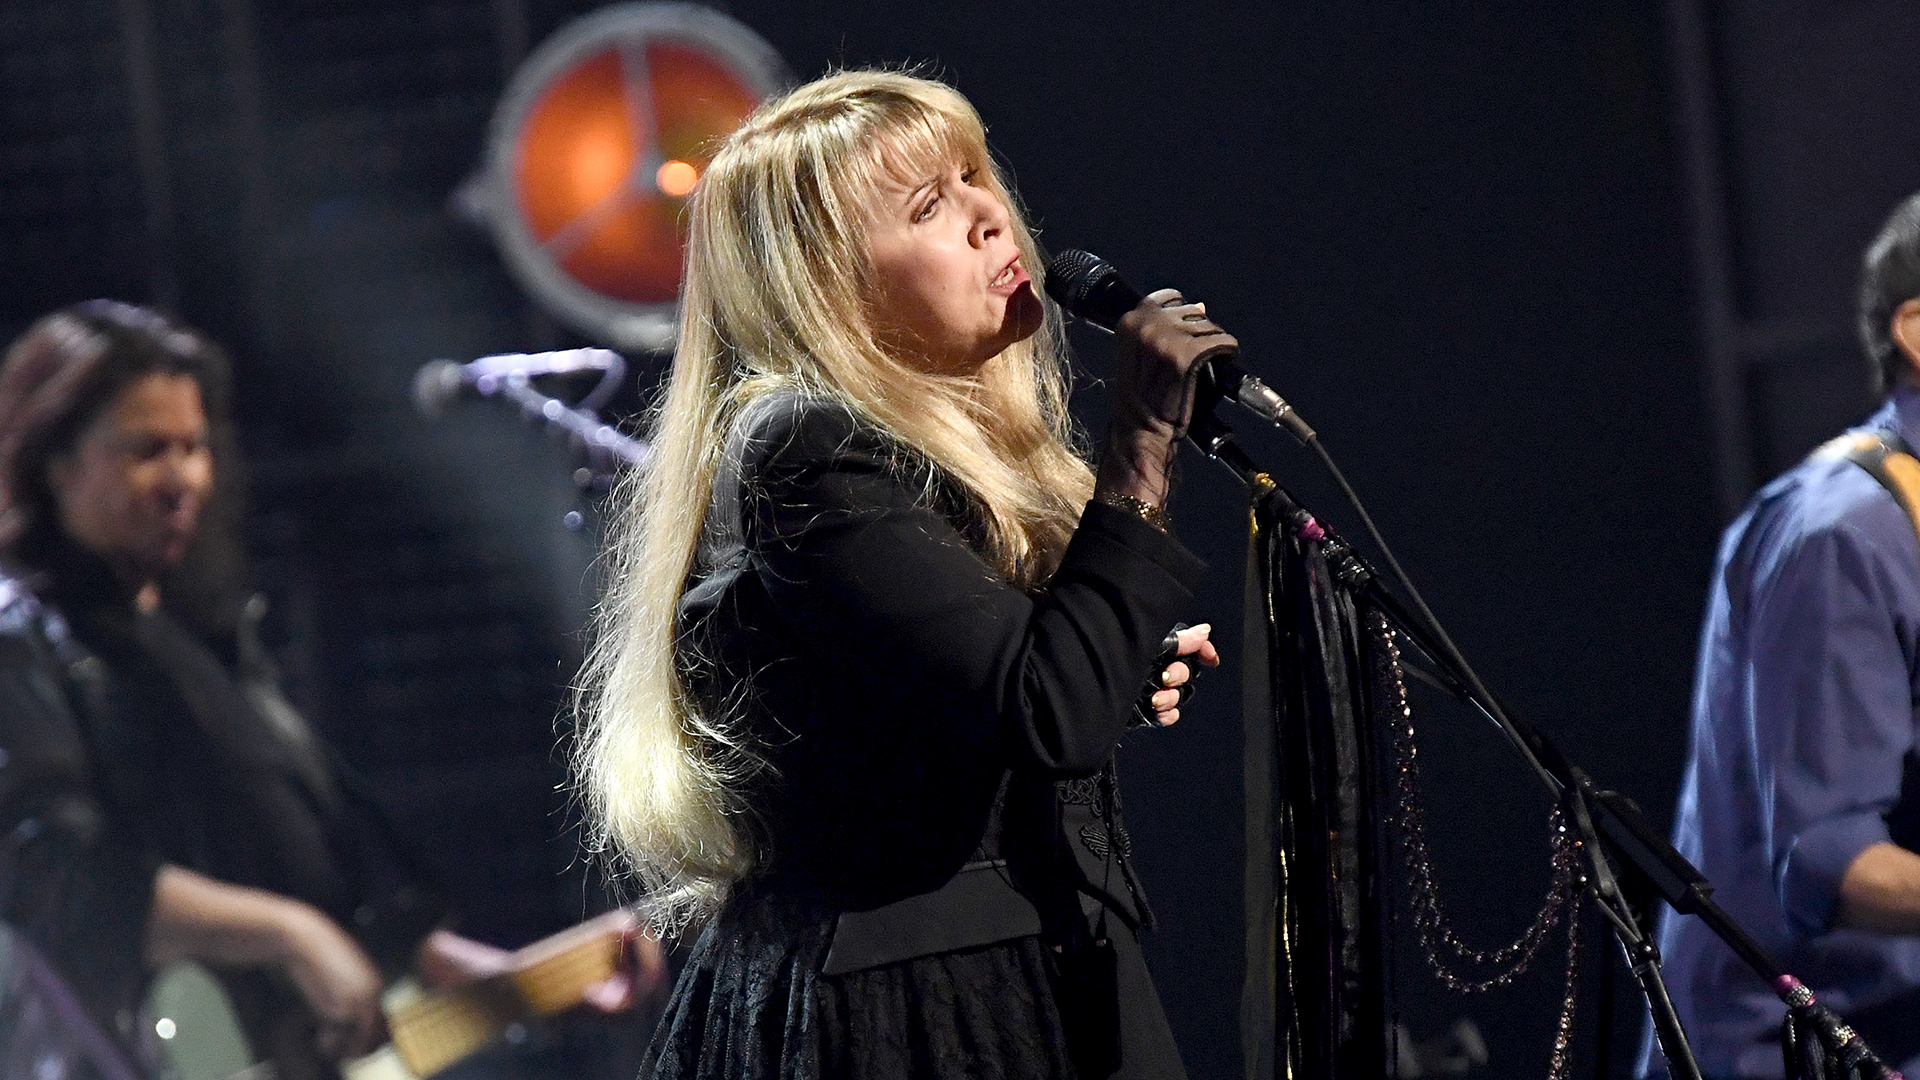 Inductee Stevie Nicks performs on stage at the 2019 Rock & Roll Hall Of Fame Induction Ceremony at Barclays Center on March 29, 2019 in New York City.